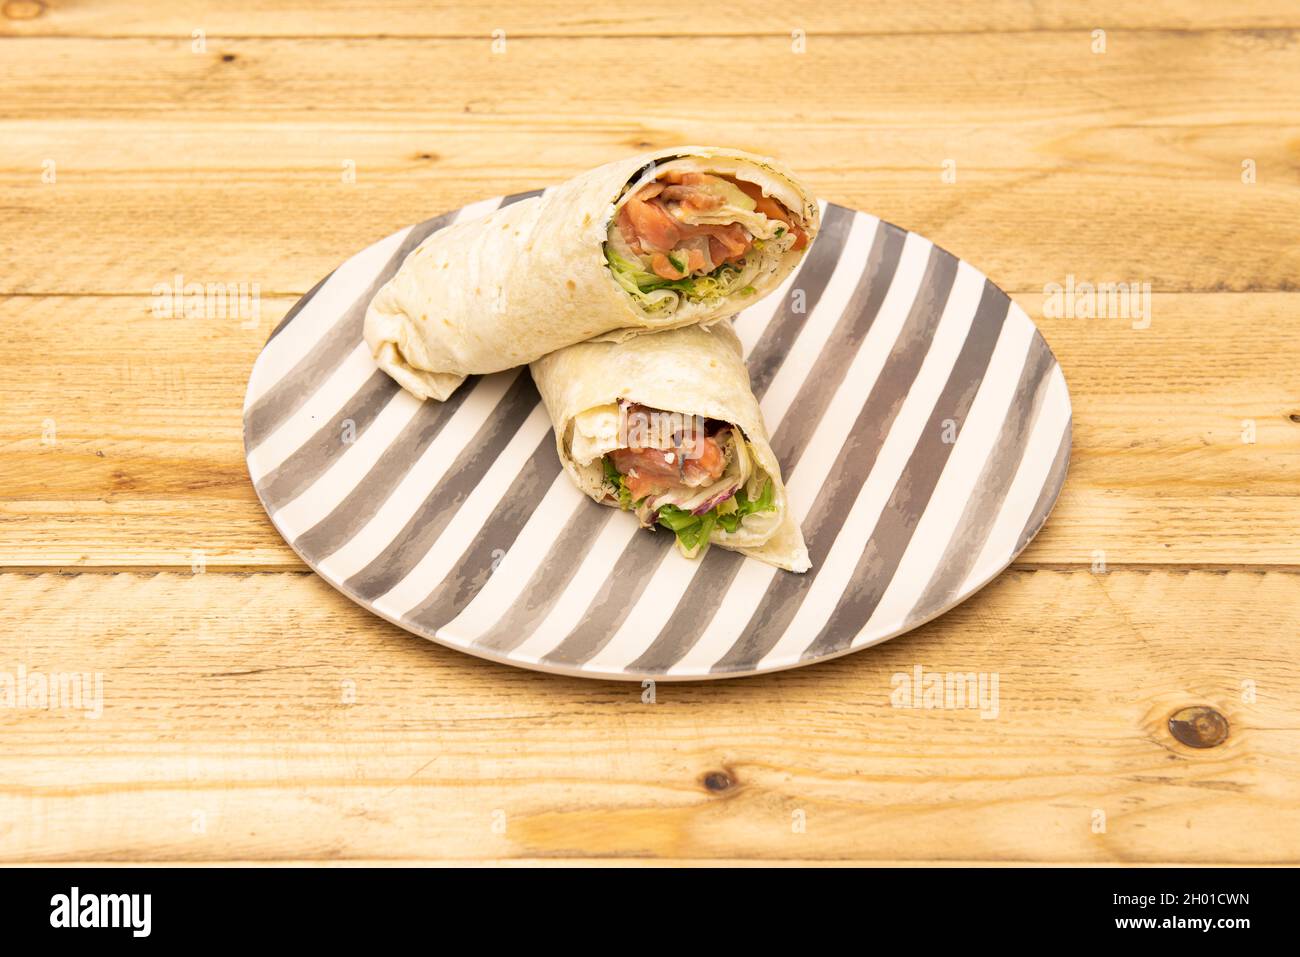 wrap stuffed with smoked Norwegian salmon with cheese and lettuce on a grated plate Stock Photo